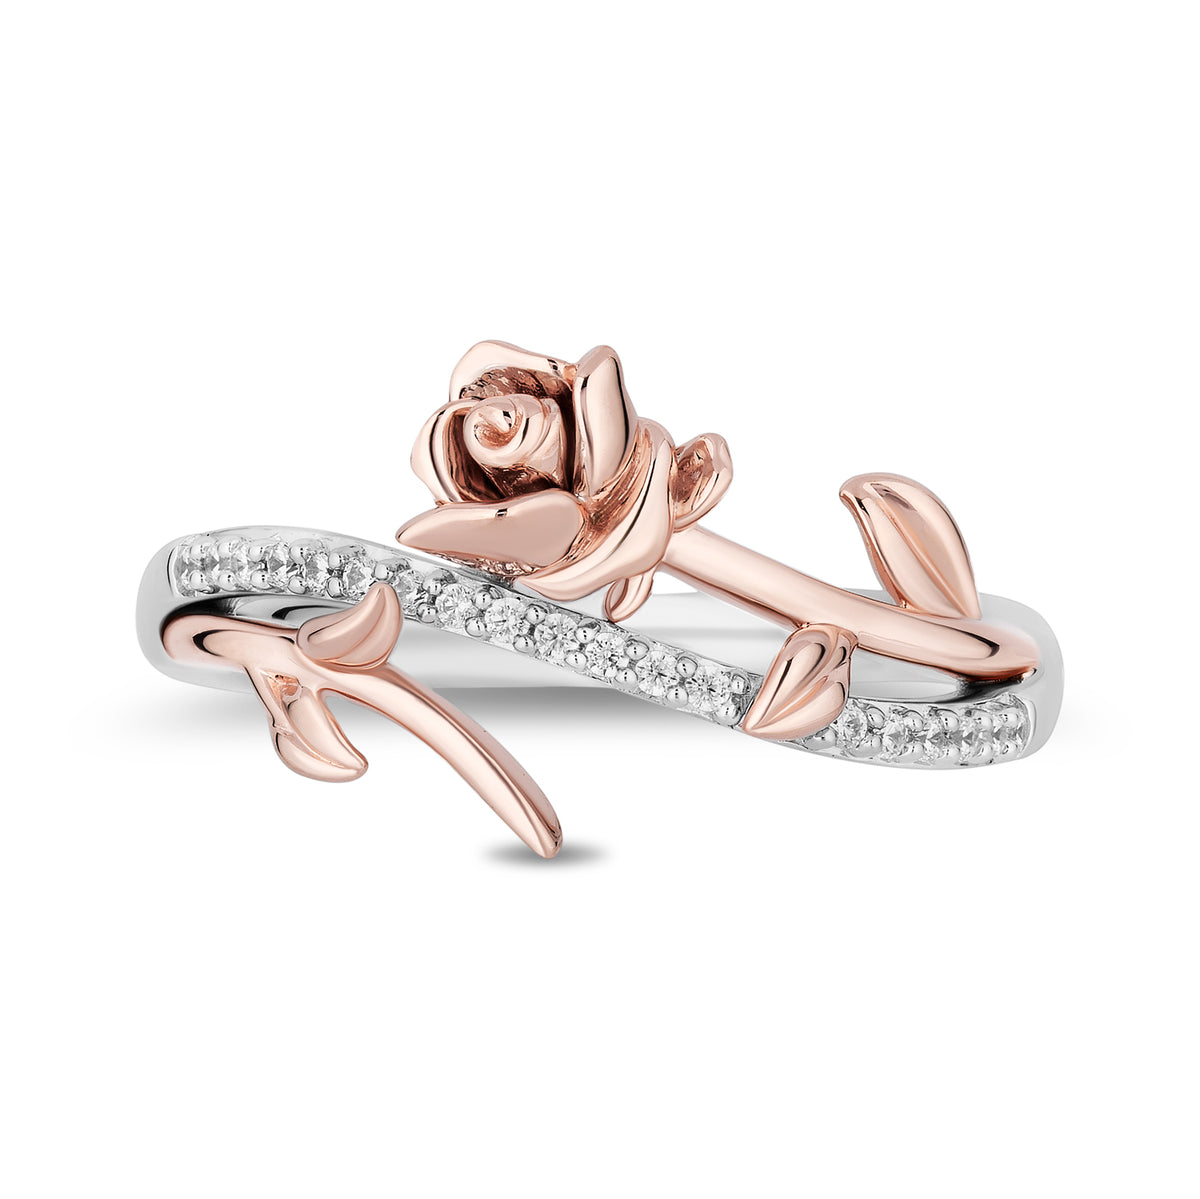 Enchanted Disney Fine Jewelry 14K Rose Gold Over Sterling Silver